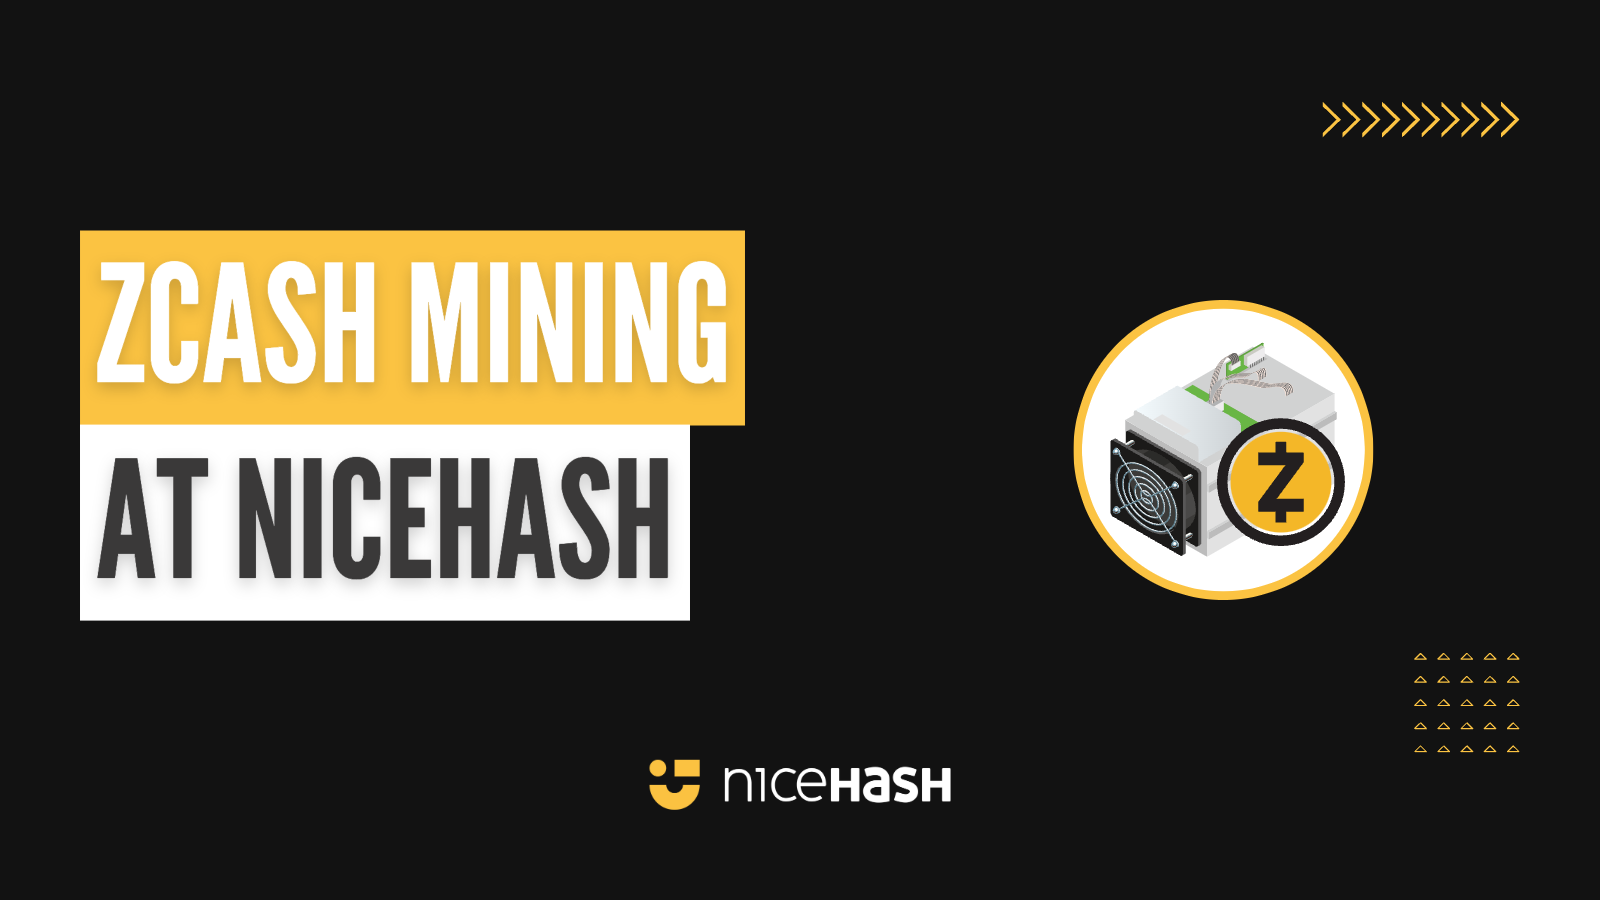 Automatic switch for Equihash - Mining Support - Zcash Community Forum